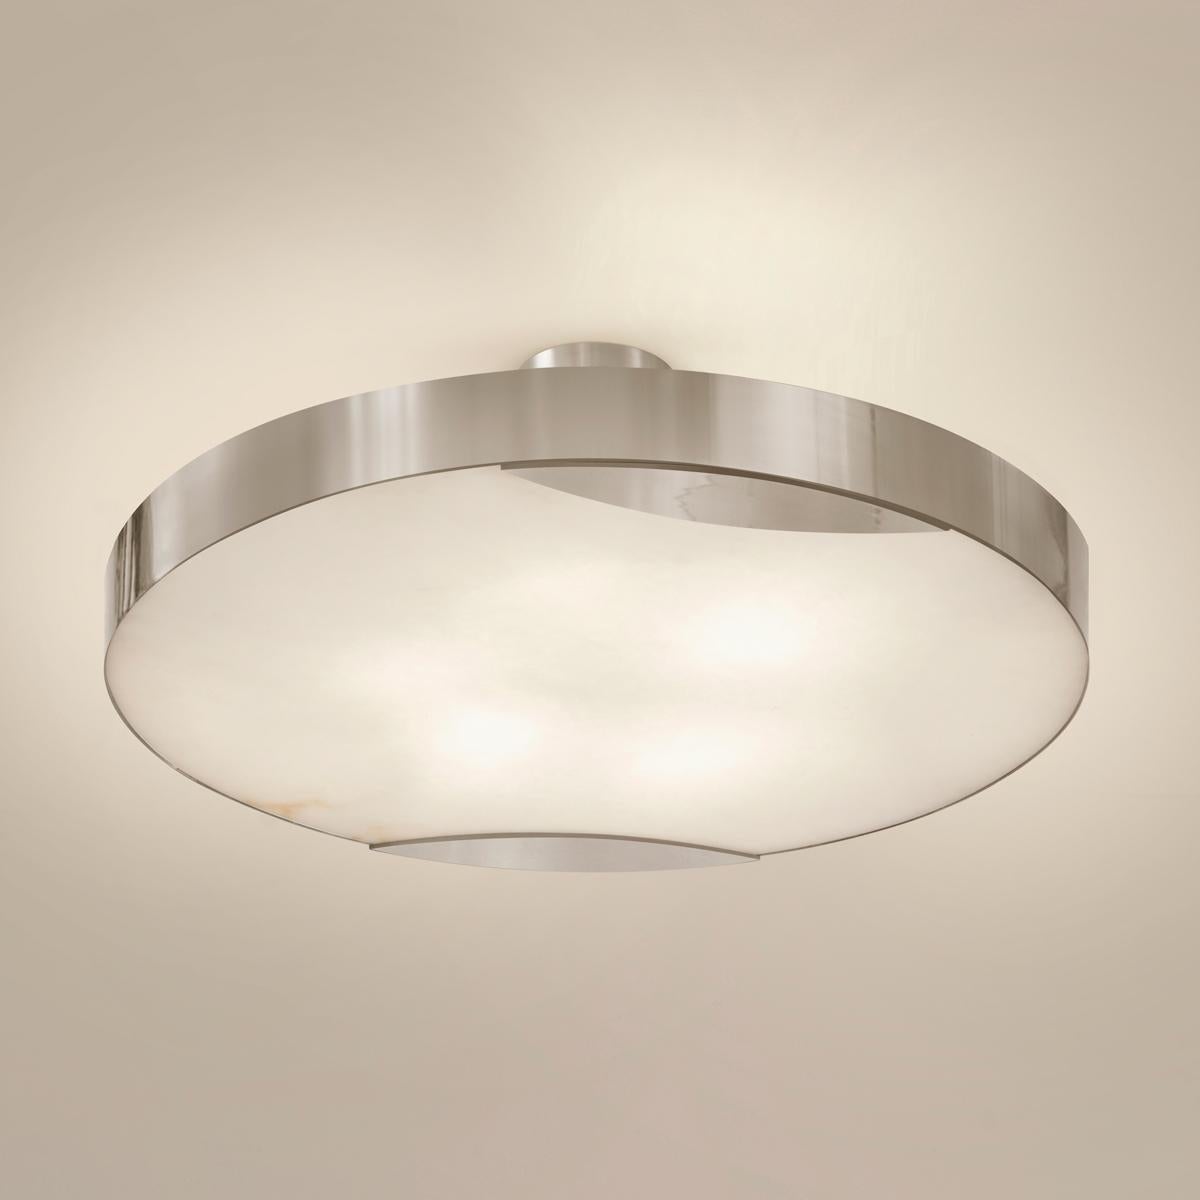 The Cloud N.1 ceiling light embodies a minimalist design with a clean brass band and a glowing Tuscan alabaster diffuser. Available in 4 sizes and can be installed as a semi flush mount or pendant.

Shown in the primary images in polished